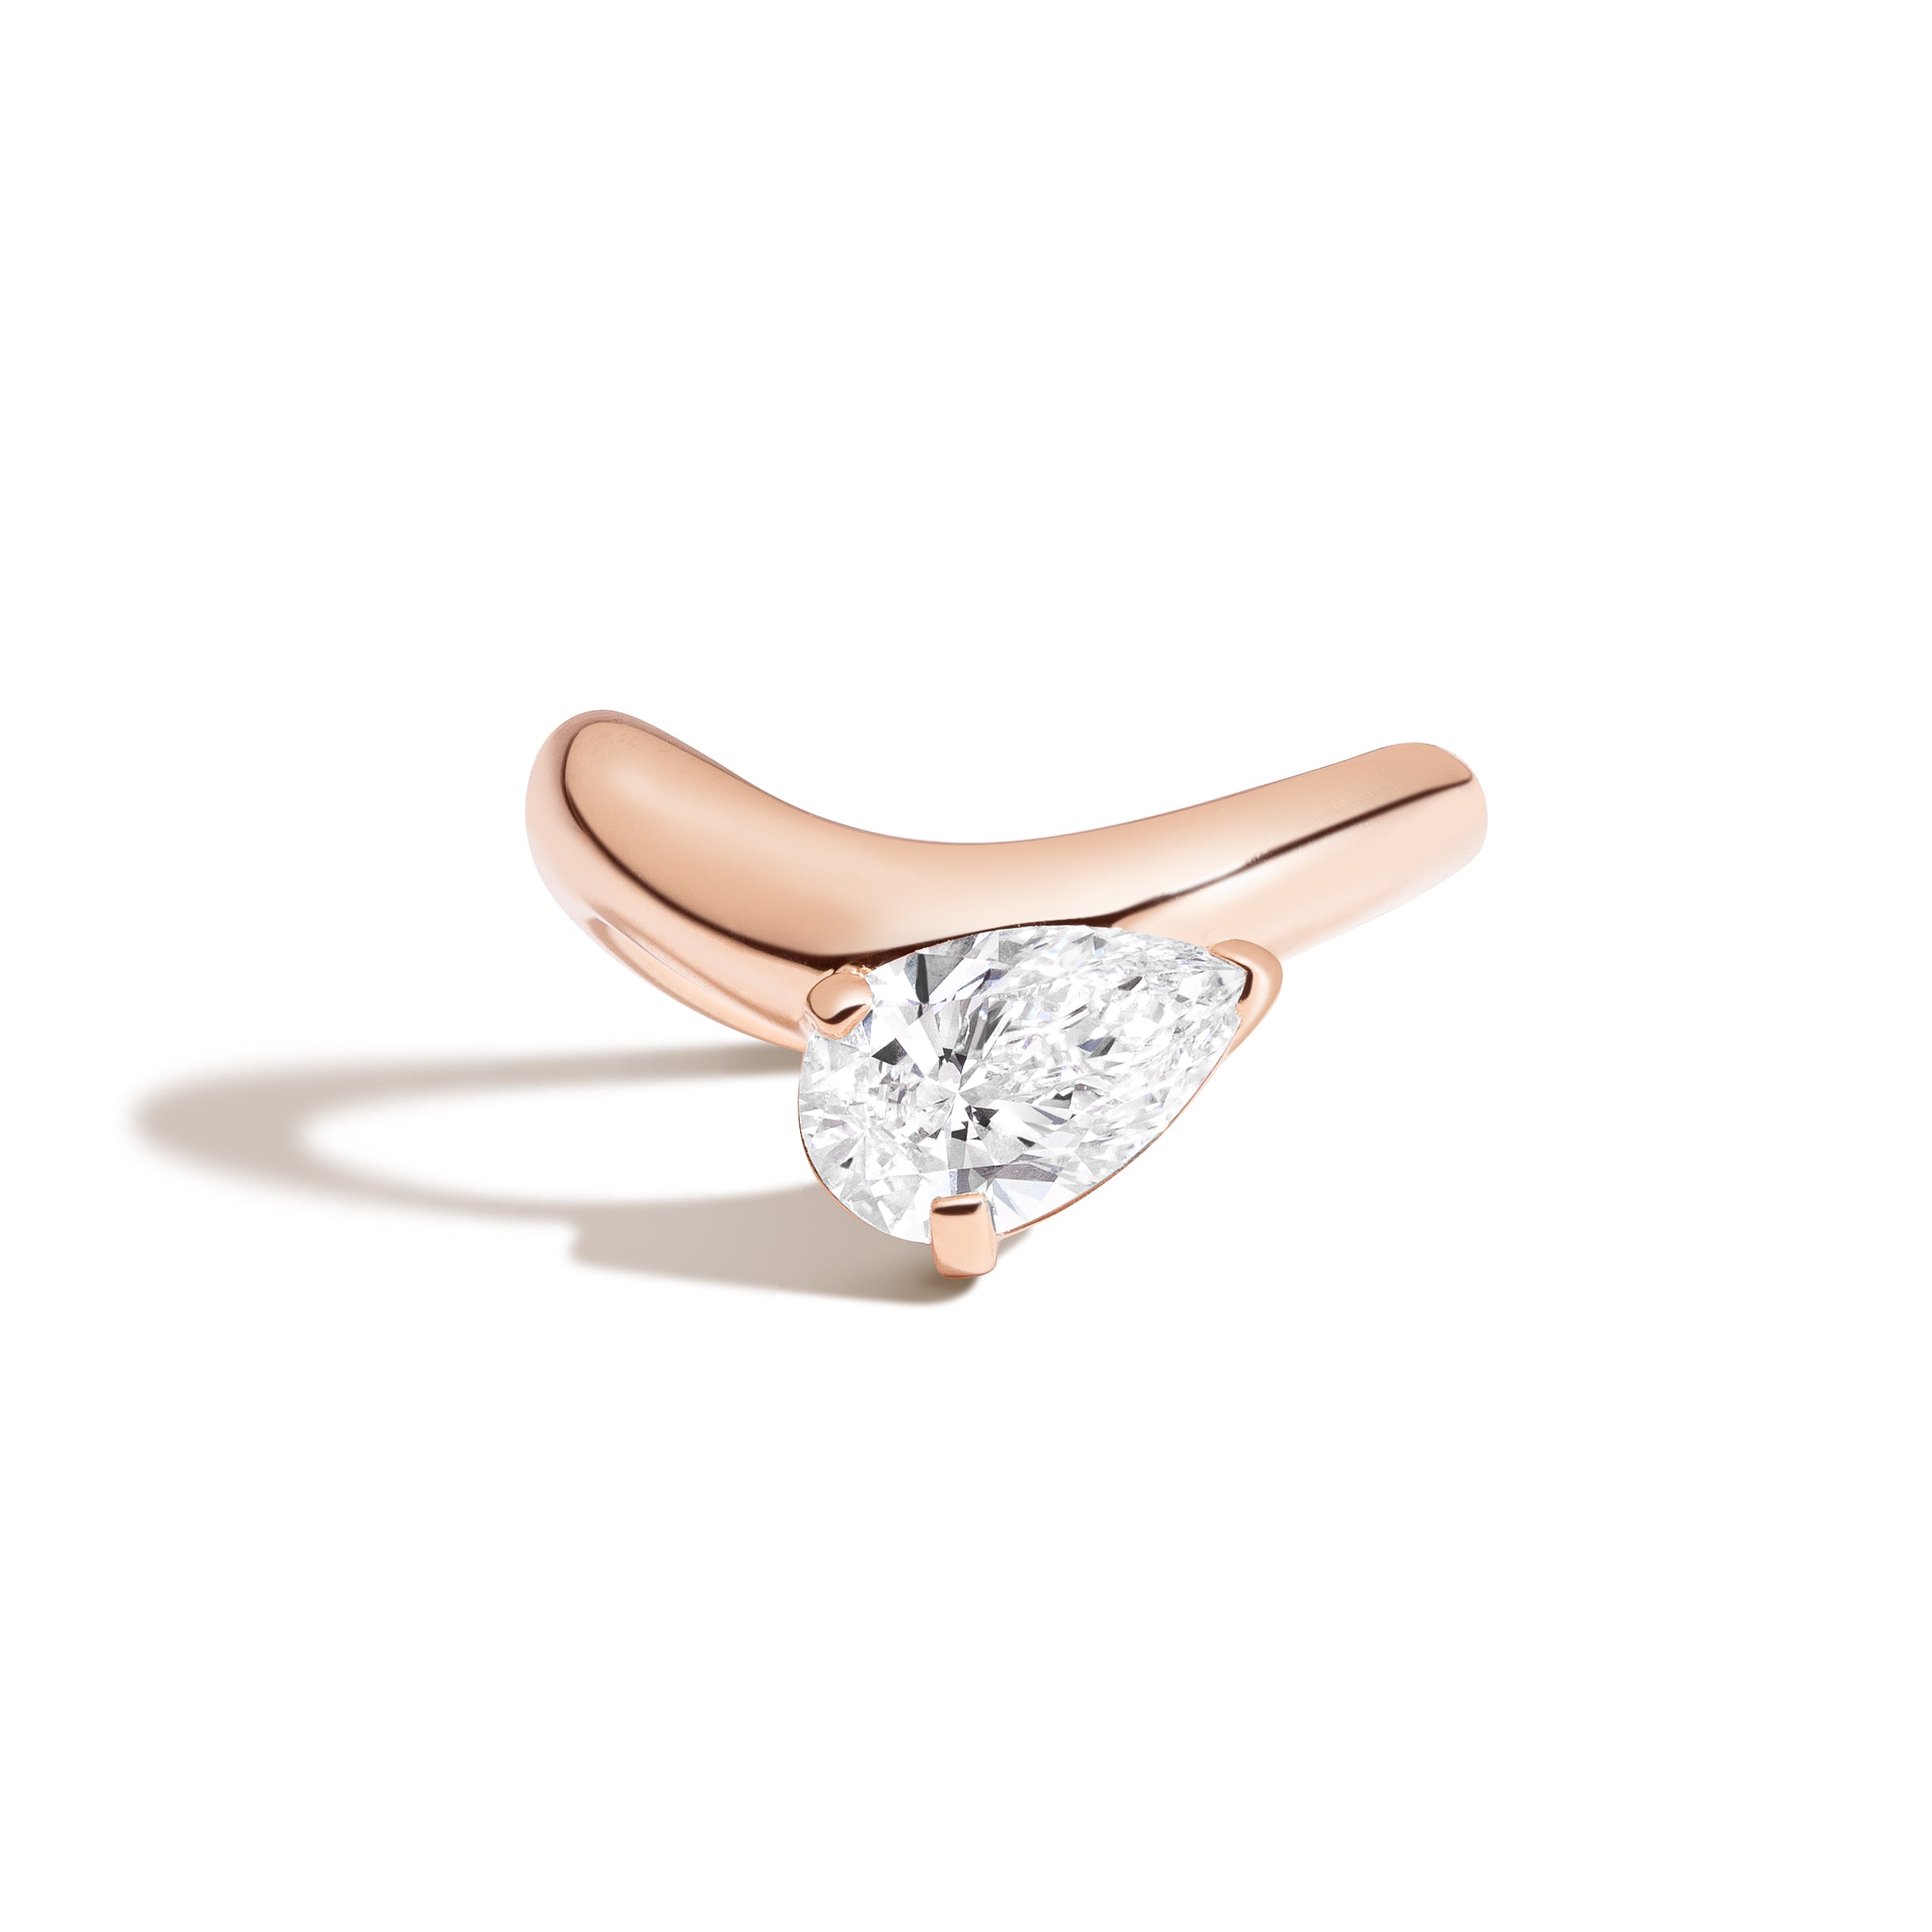 Shahla Karimi Cloud Collection Offset Pear Ring 14K Rose Gold